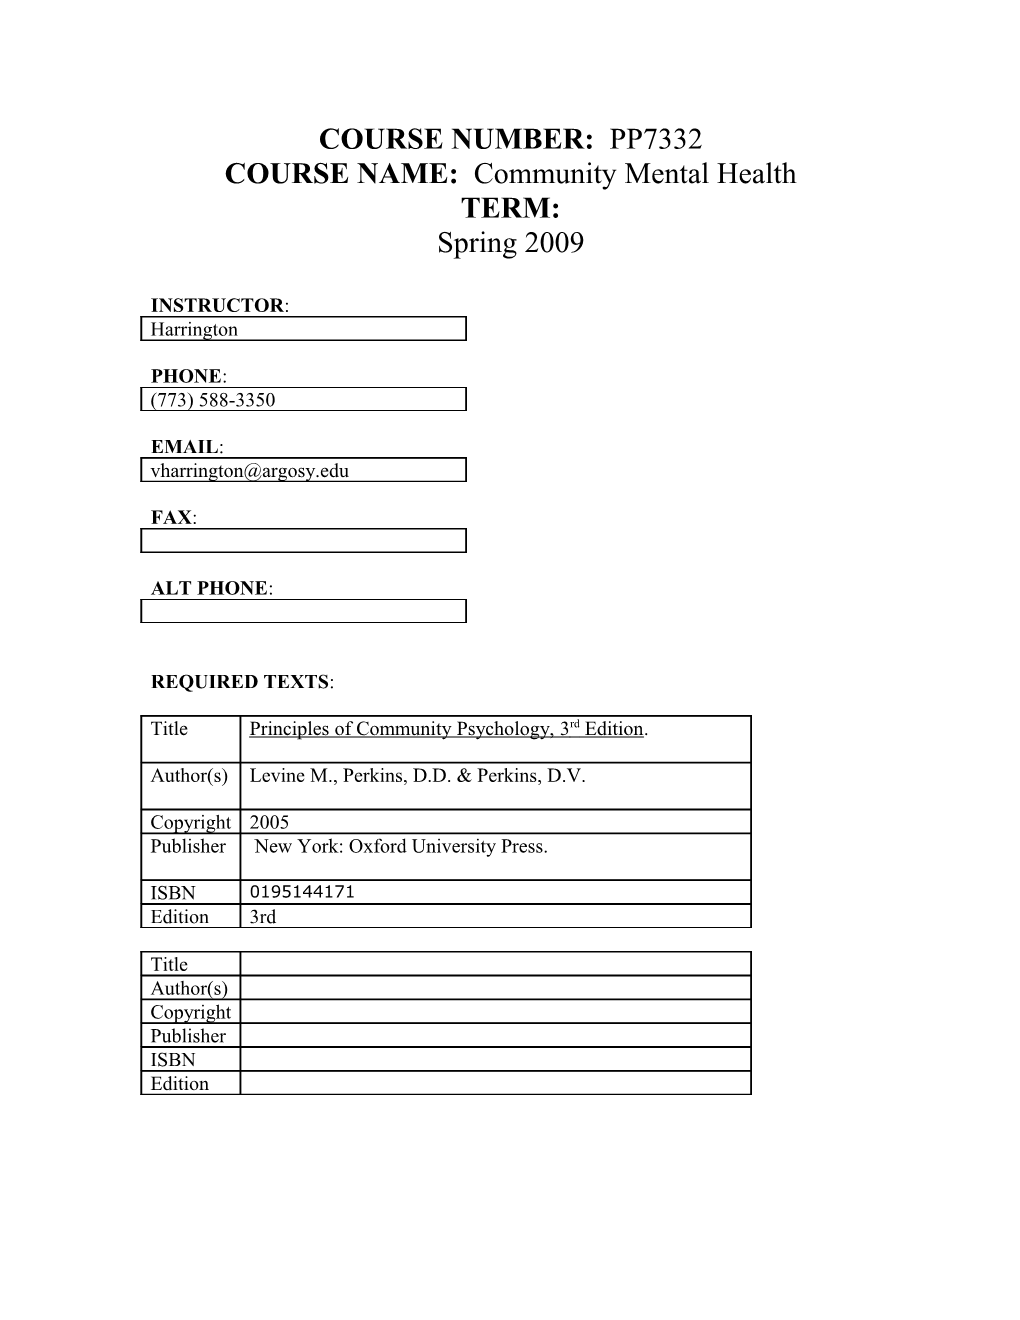 COURSE NAME: Community Mental Health